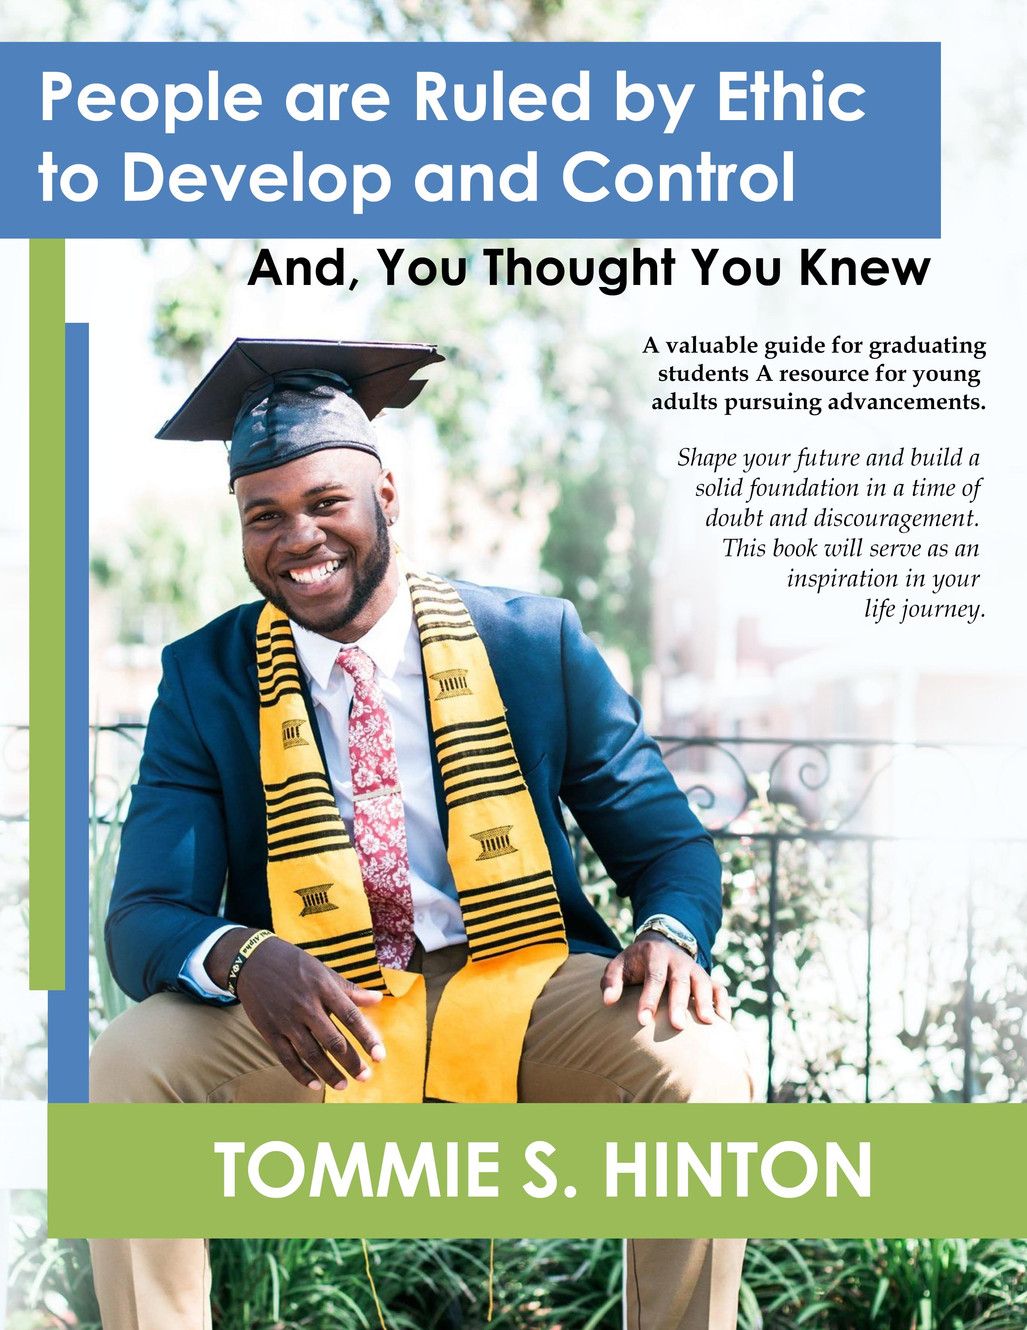 Career Guide for Graduating Students | Author Tommie S. Hinton